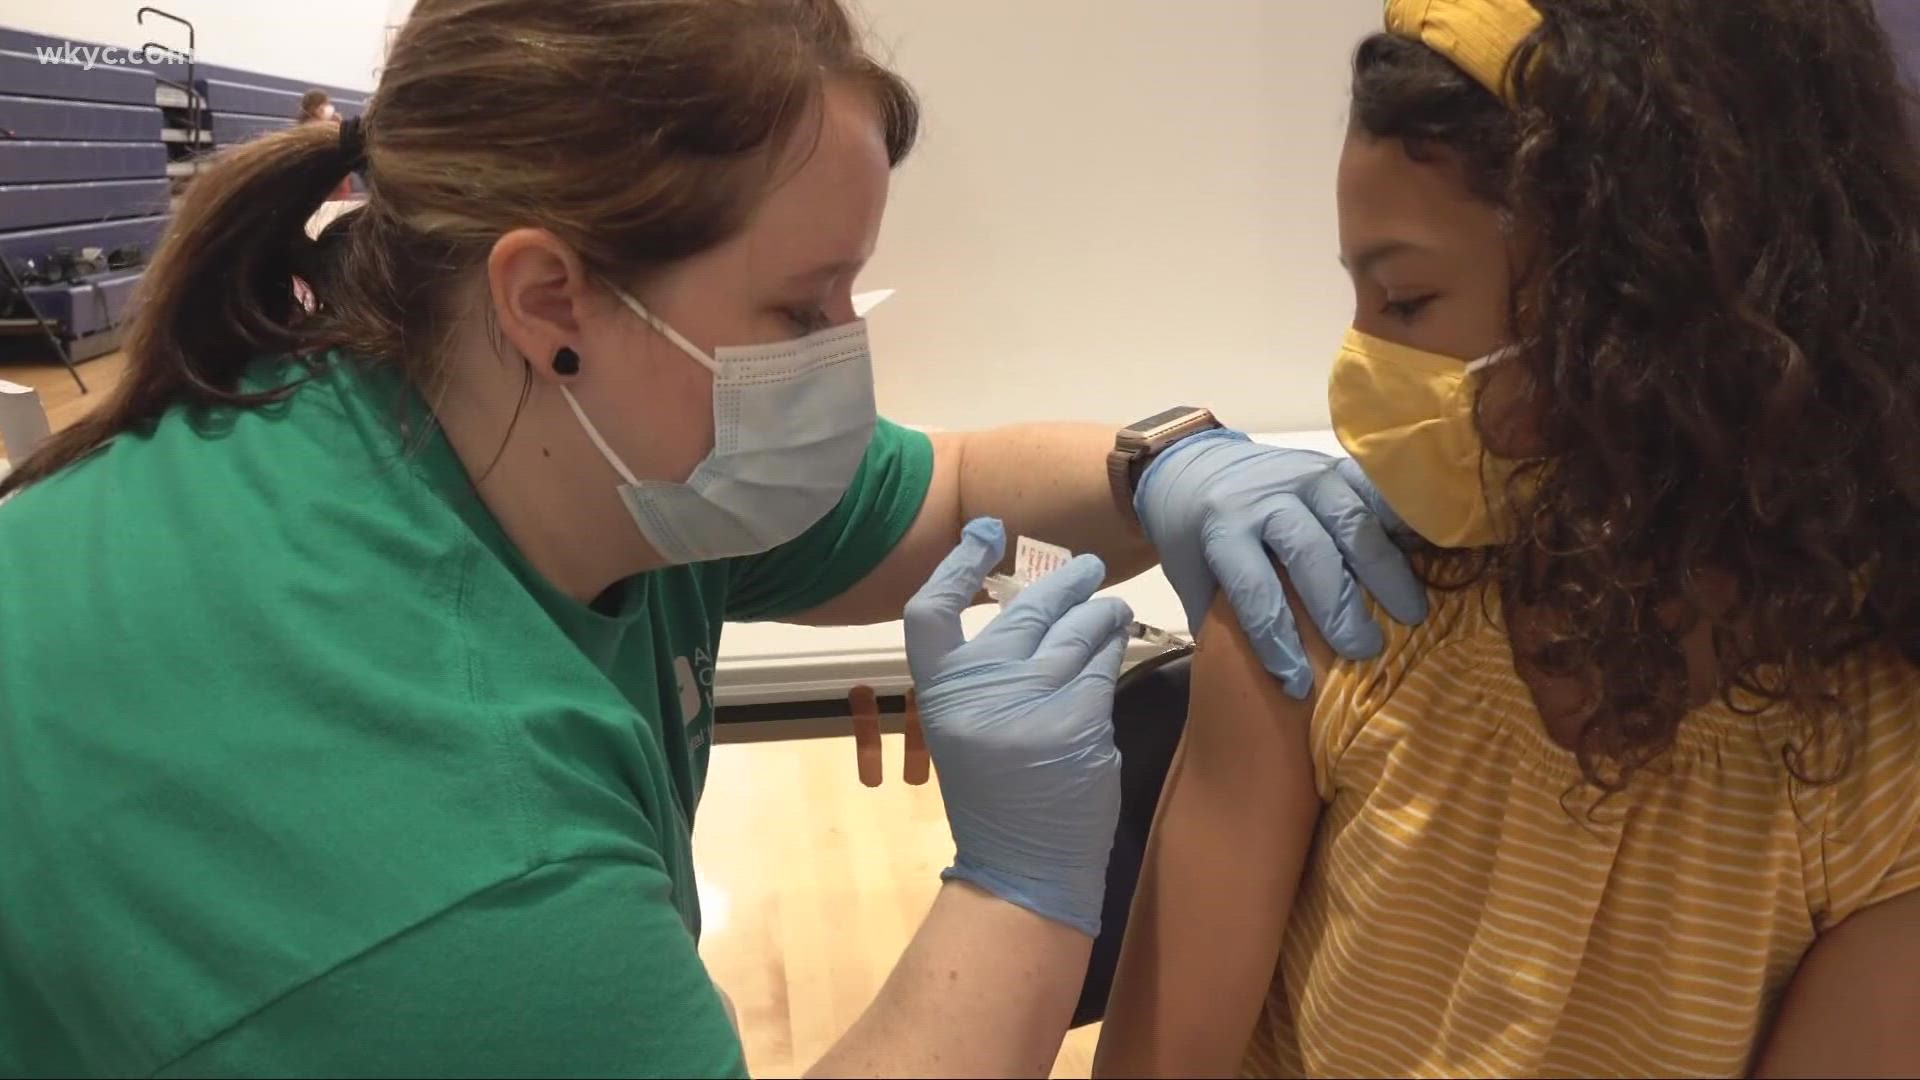 To date, nearly 71,000 kids age 5 to 11 have received their first dose of the COVID-19 vaccine.